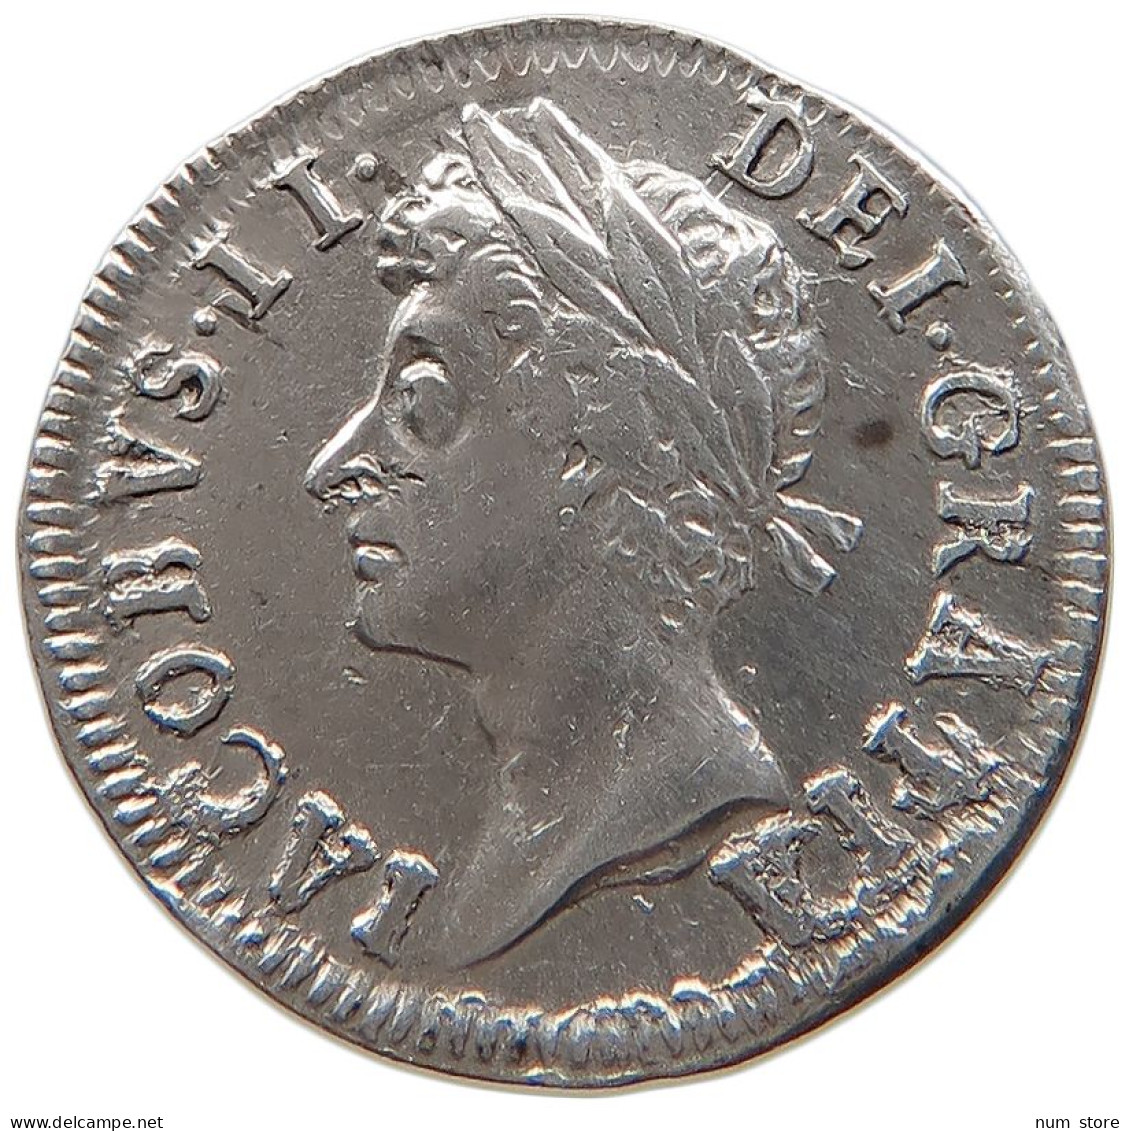 GREAT BRITAIN TWOPENCE MAUNDY 1686 George II. 1727-1760. #t143 0653 - D. 2 Pence